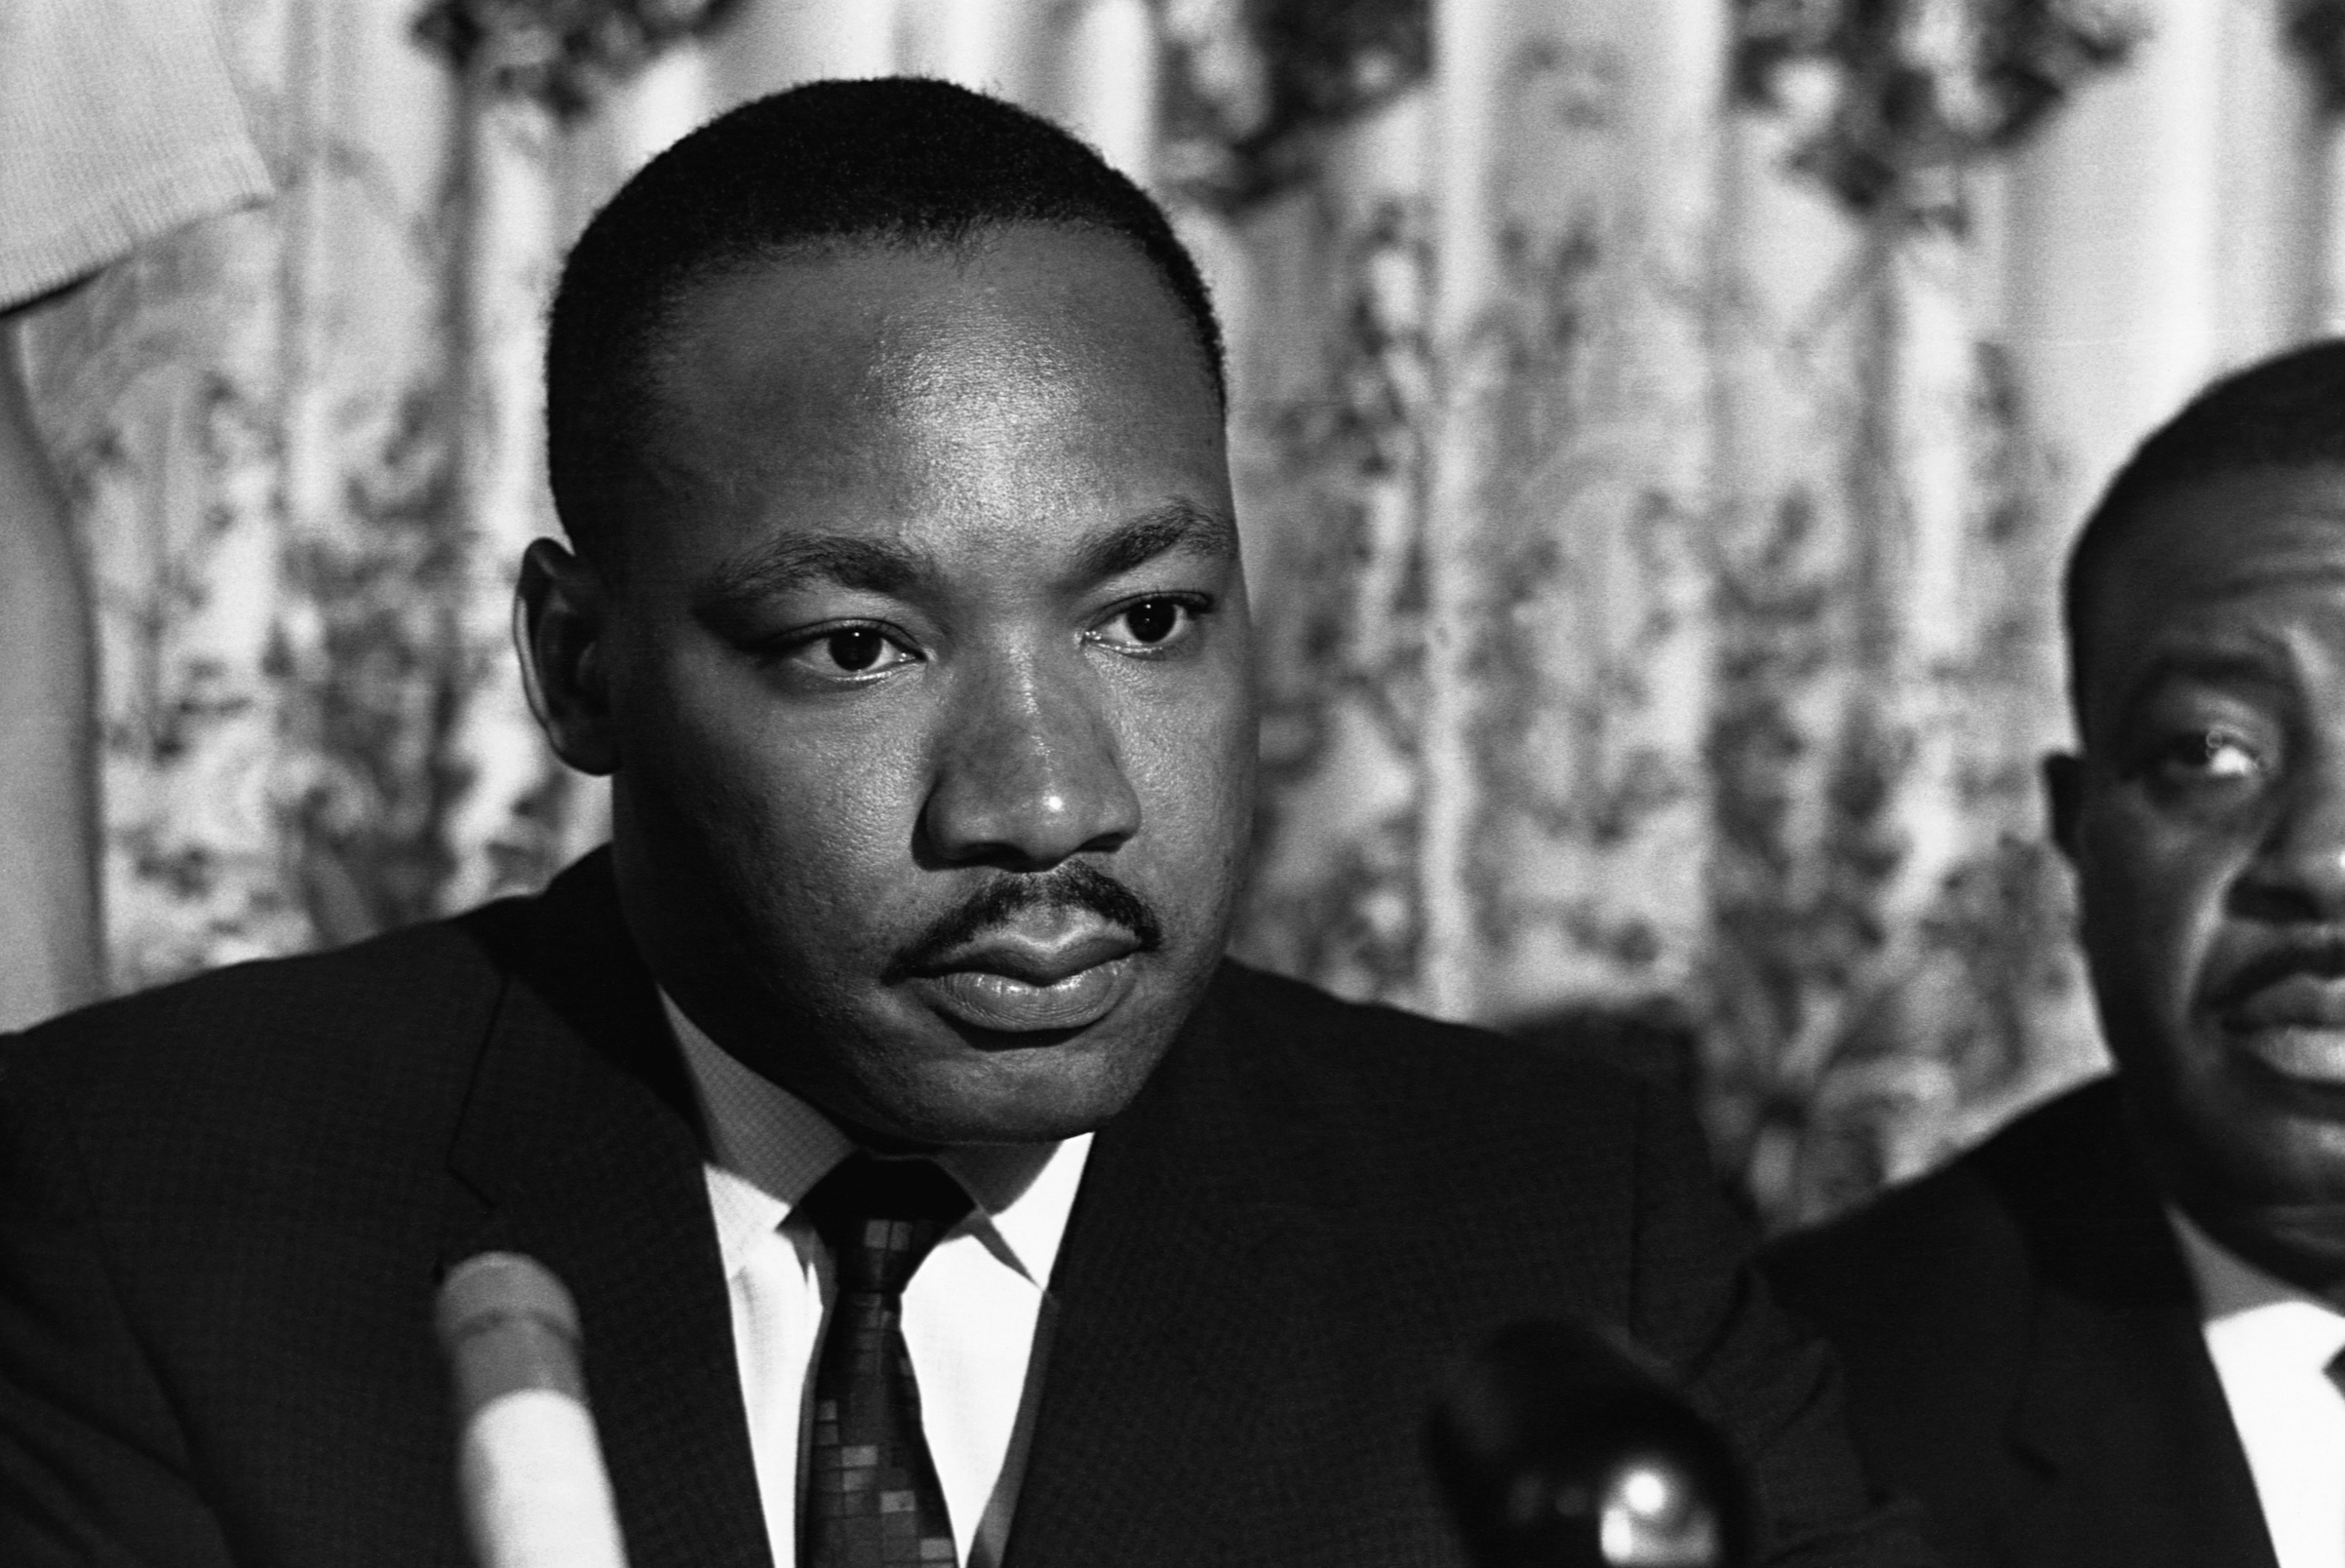 Martin Luther King Jr., Inspiring wallpapers, MLK's influence, Thought-provoking visuals, 2410x1610 HD Desktop